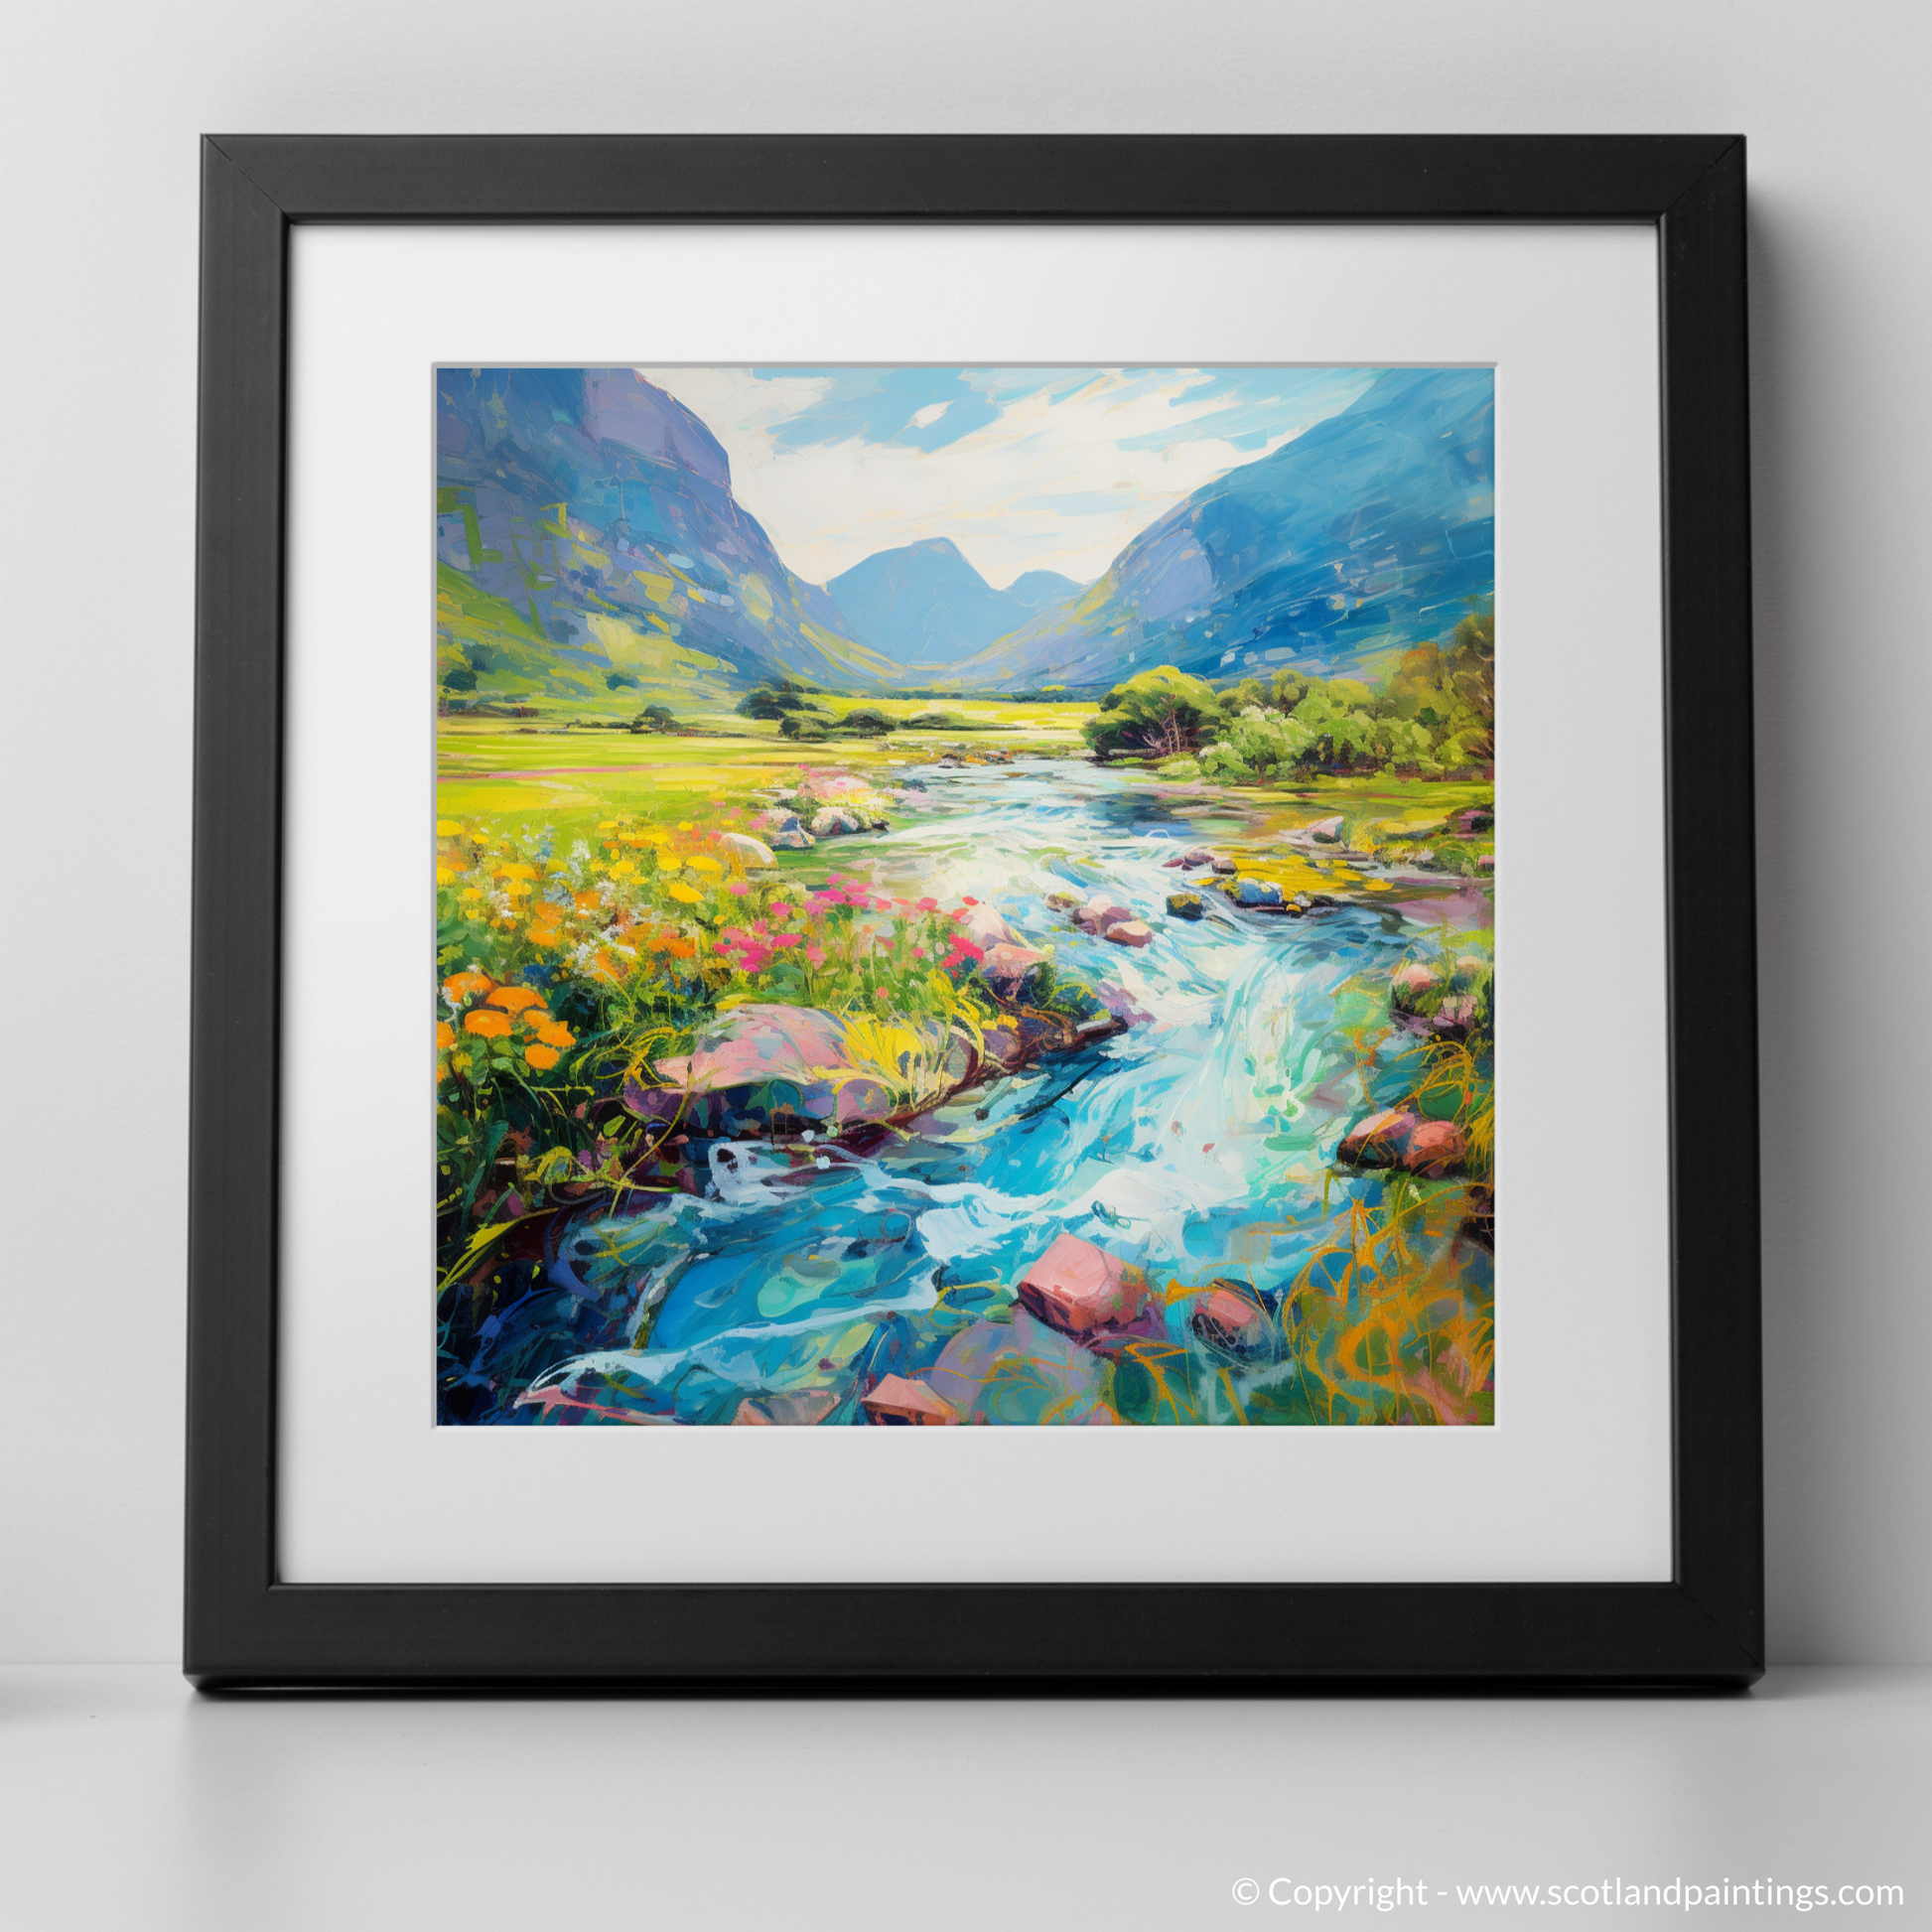 Art Print of River in Glencoe during summer with a black frame